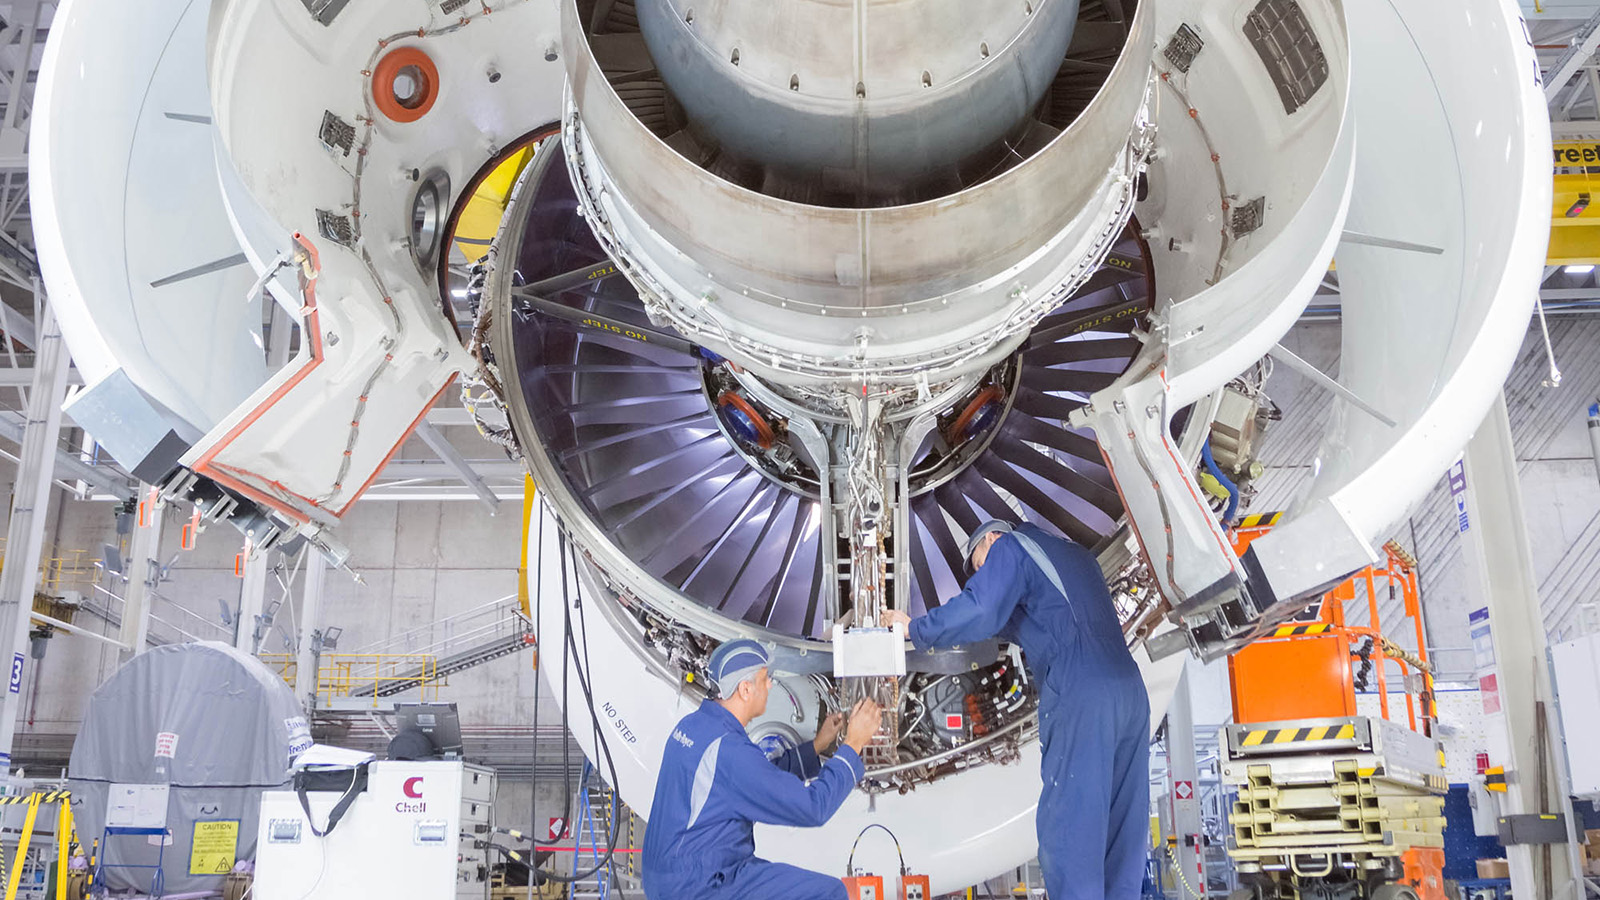 Rolls-Royce’s Photo of the Trent 7000, Their Latest Large Turbofan Aircraft Engine